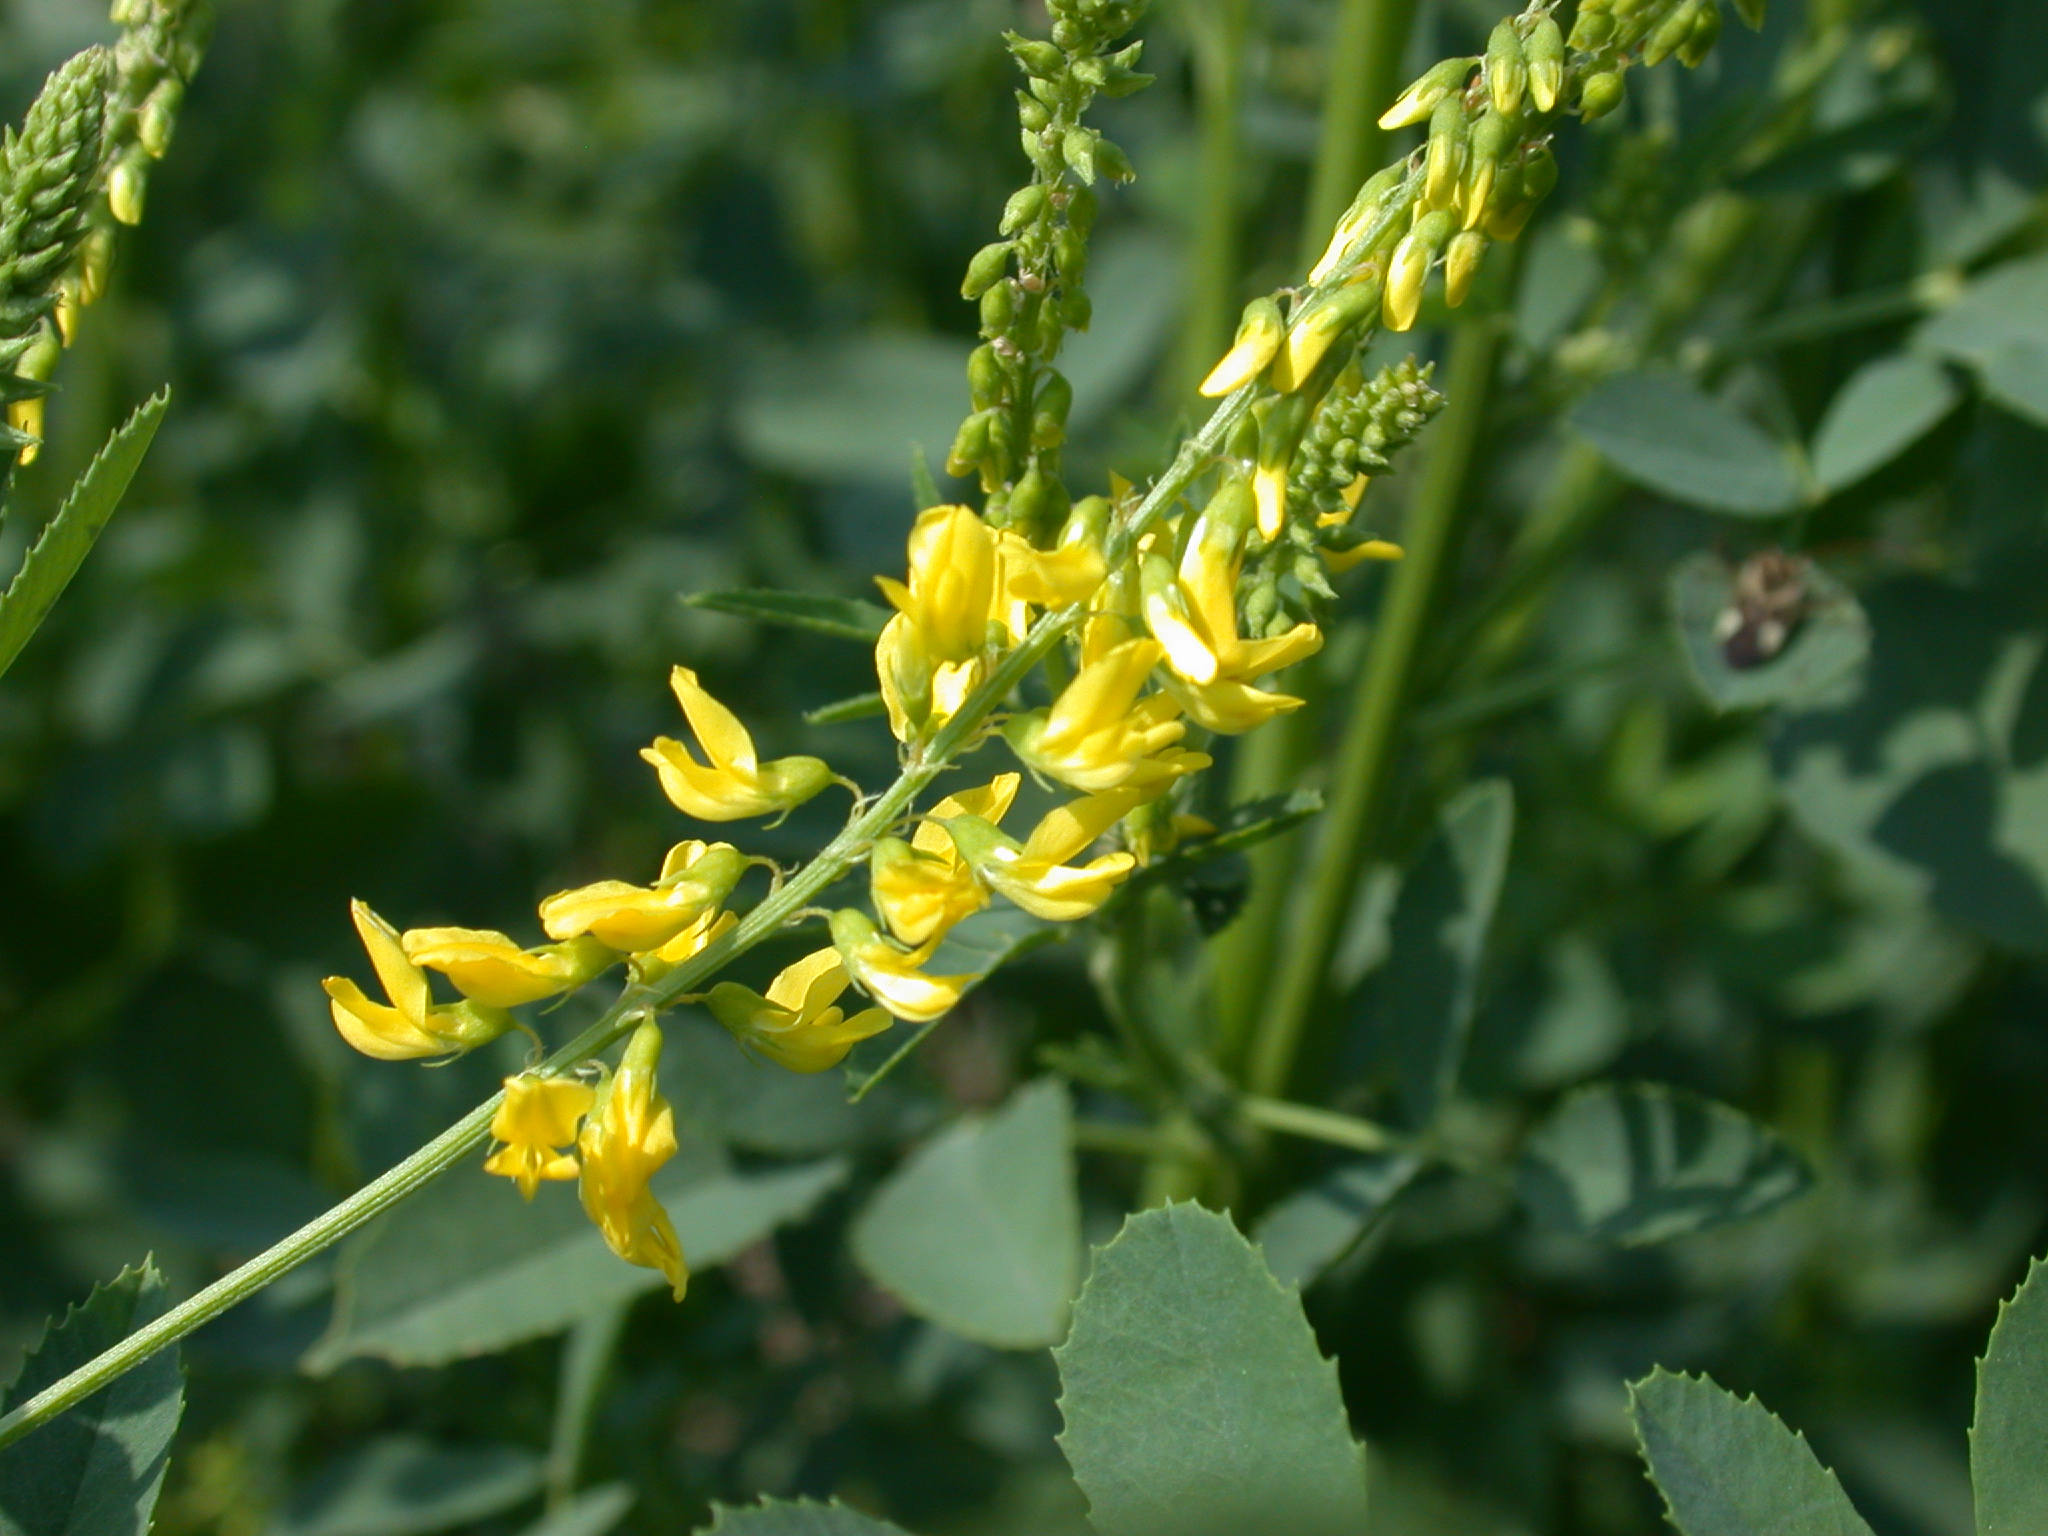 Sweetclover inflorescence